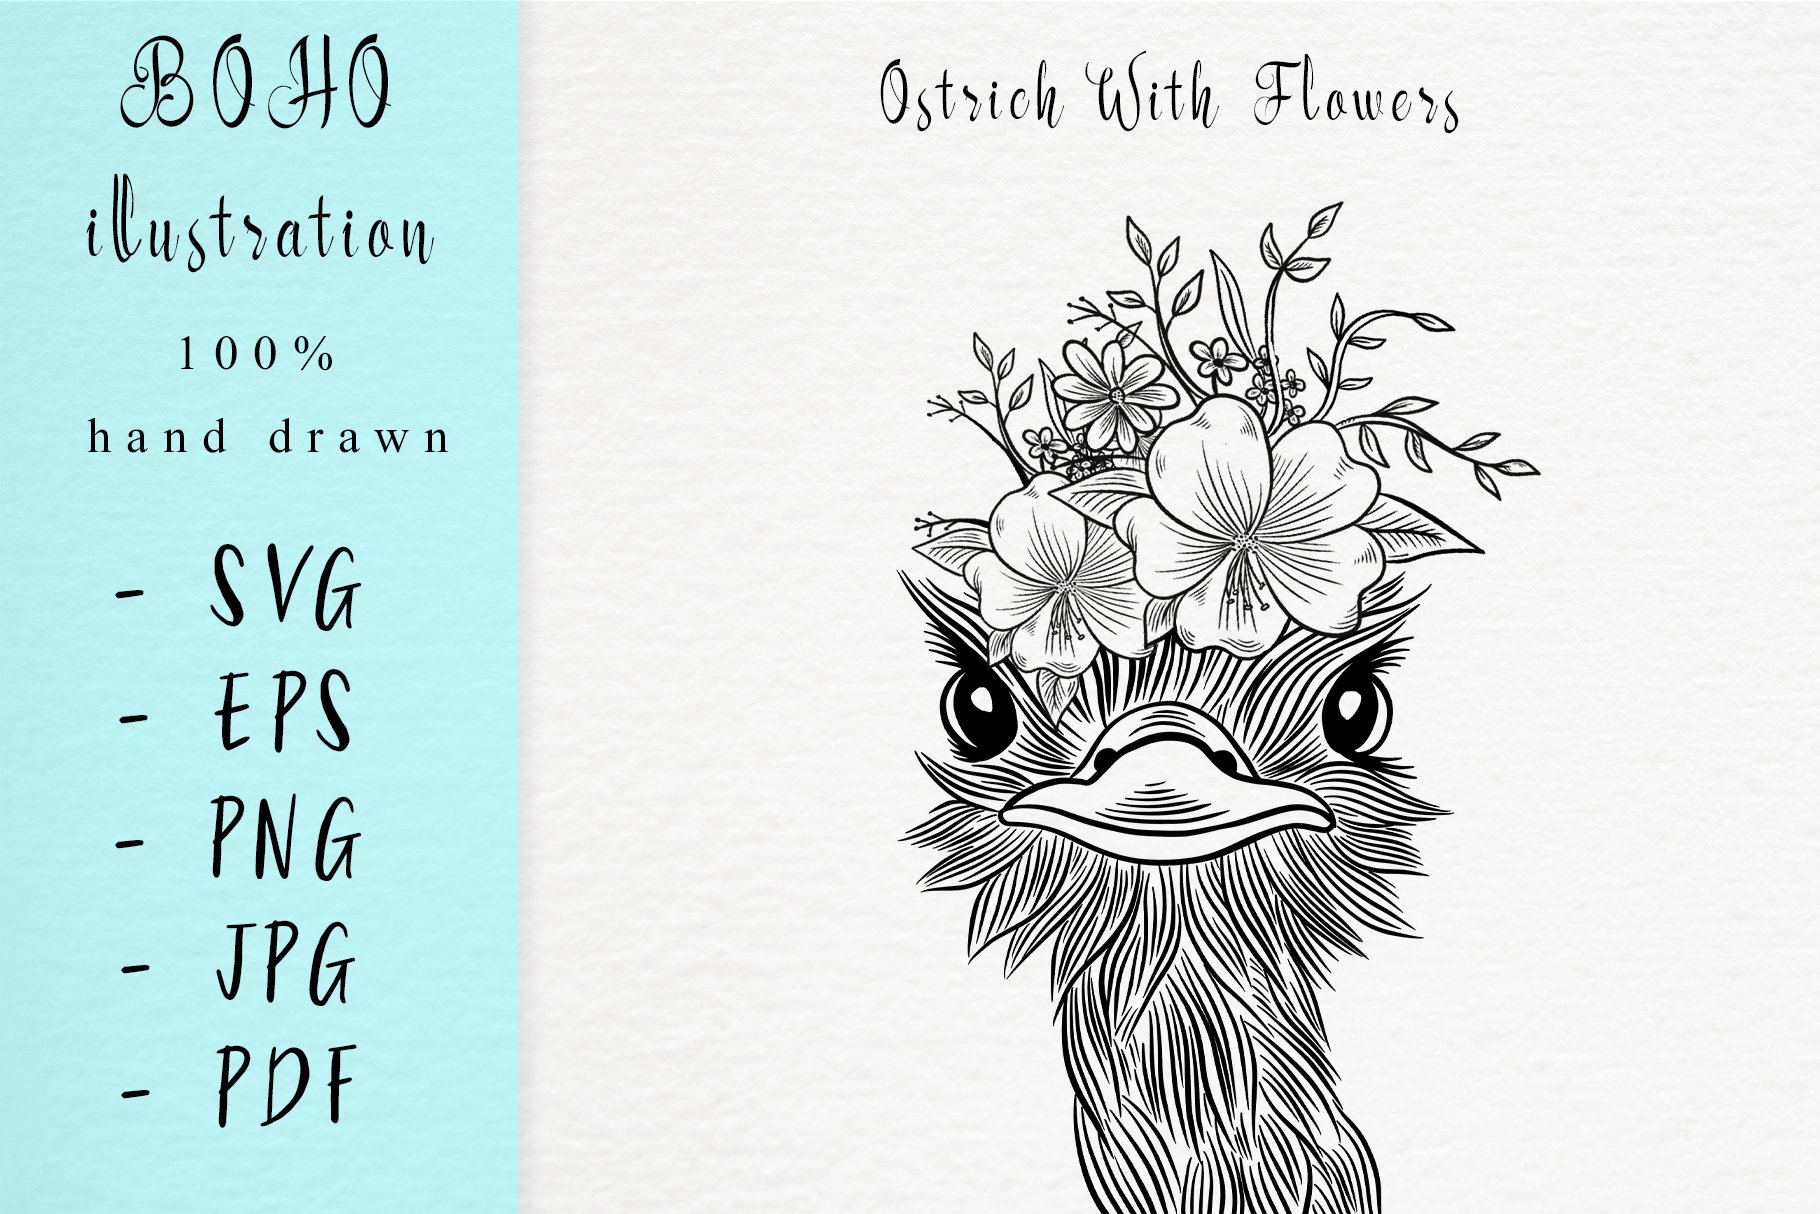 Hand drawn ostrich with flowers.